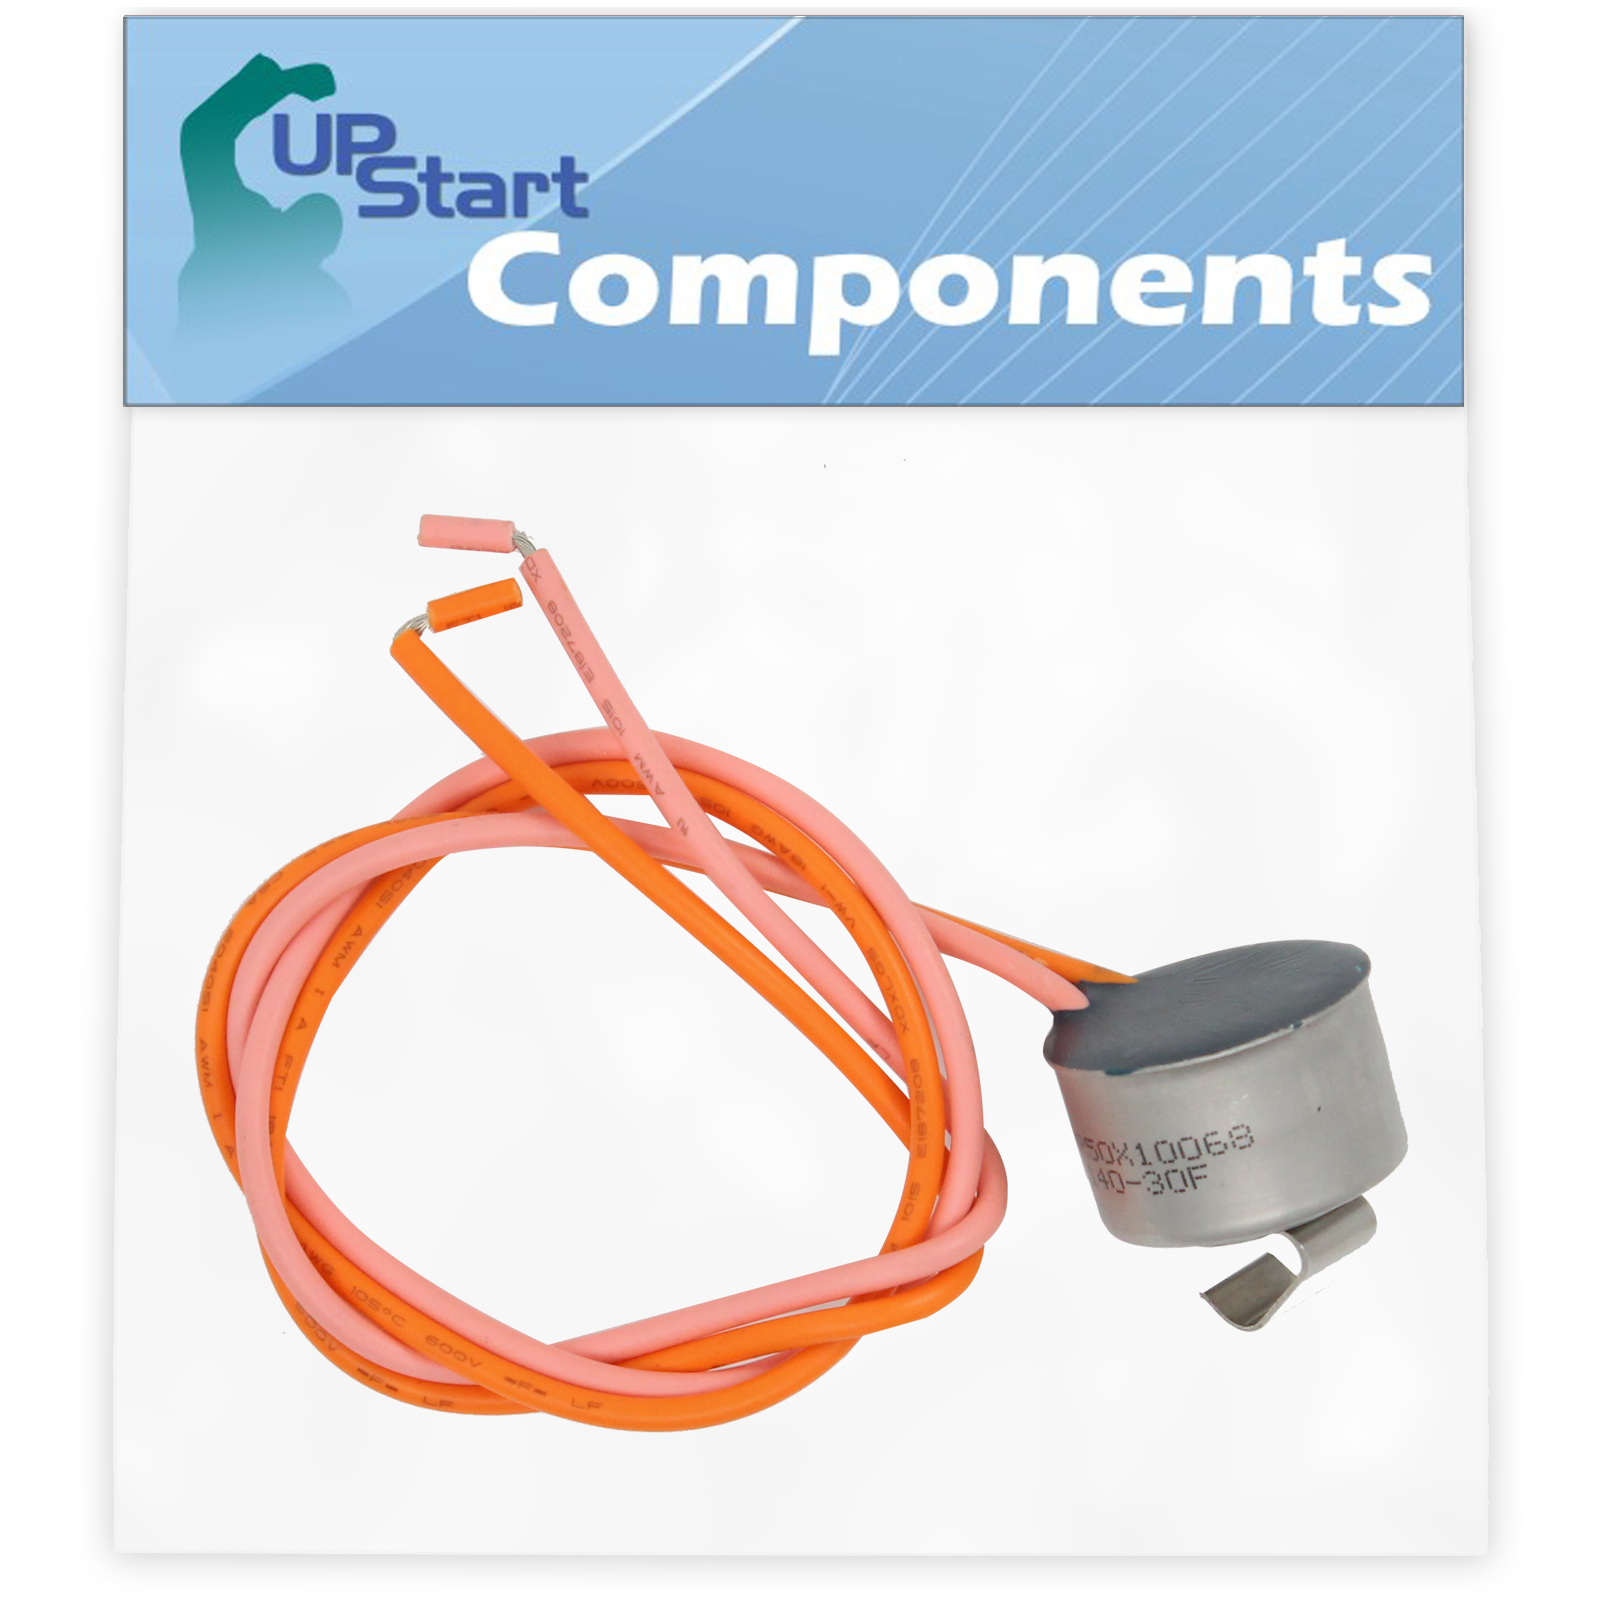 WR50X10068 Defrost Thermostat Replacement for General Electric GCG21IEMHFBB Refrigerator - Compatible with WR50X10068 Defrost Limiter Thermostat - UpStart Components Brand - image 1 of 2